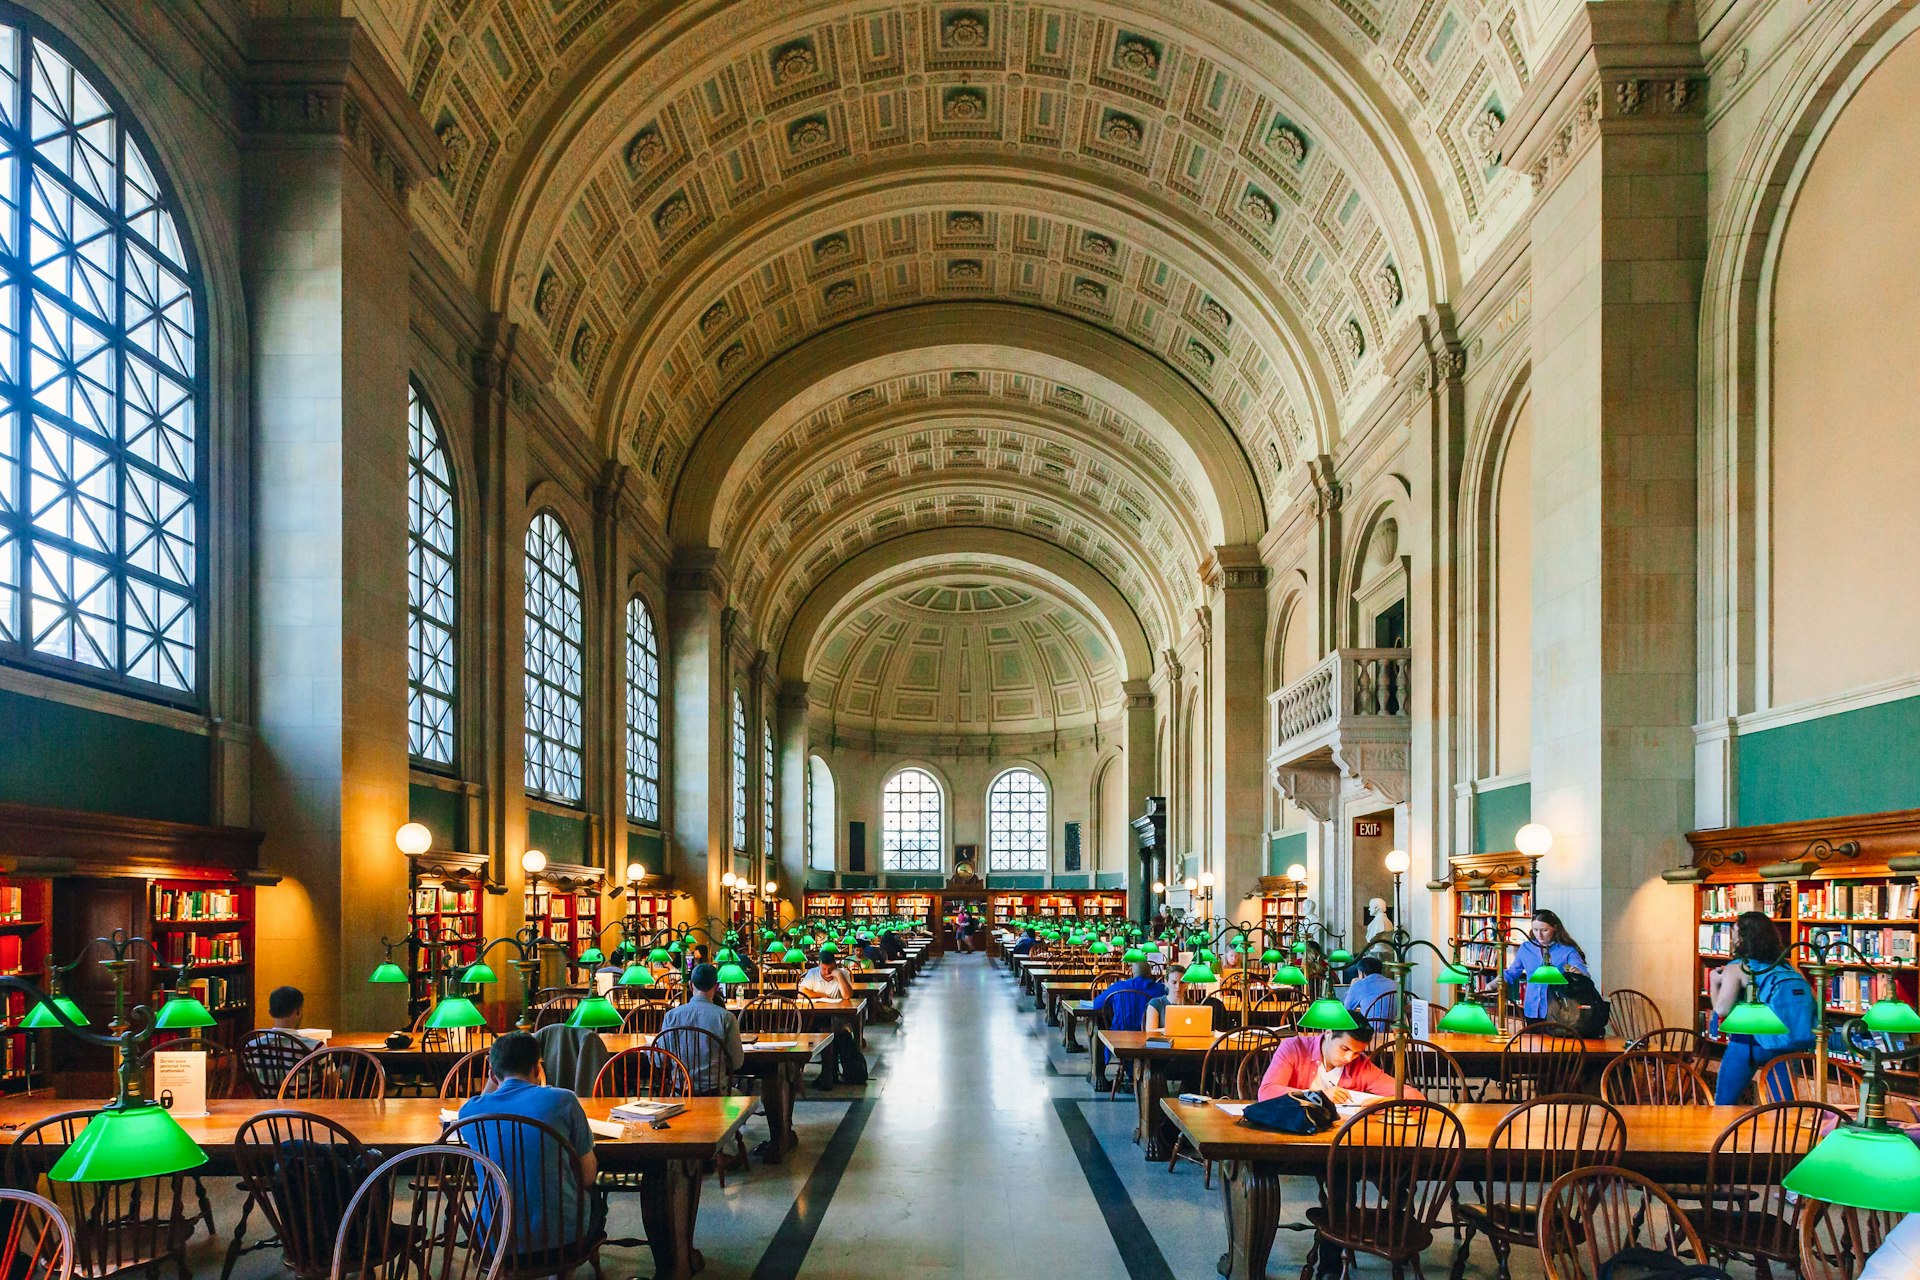 Locals study and read books in the Reading Room at McKim Building of Boston Public Library Mark Zhu shutterstock_1281635212 rfc.jpg